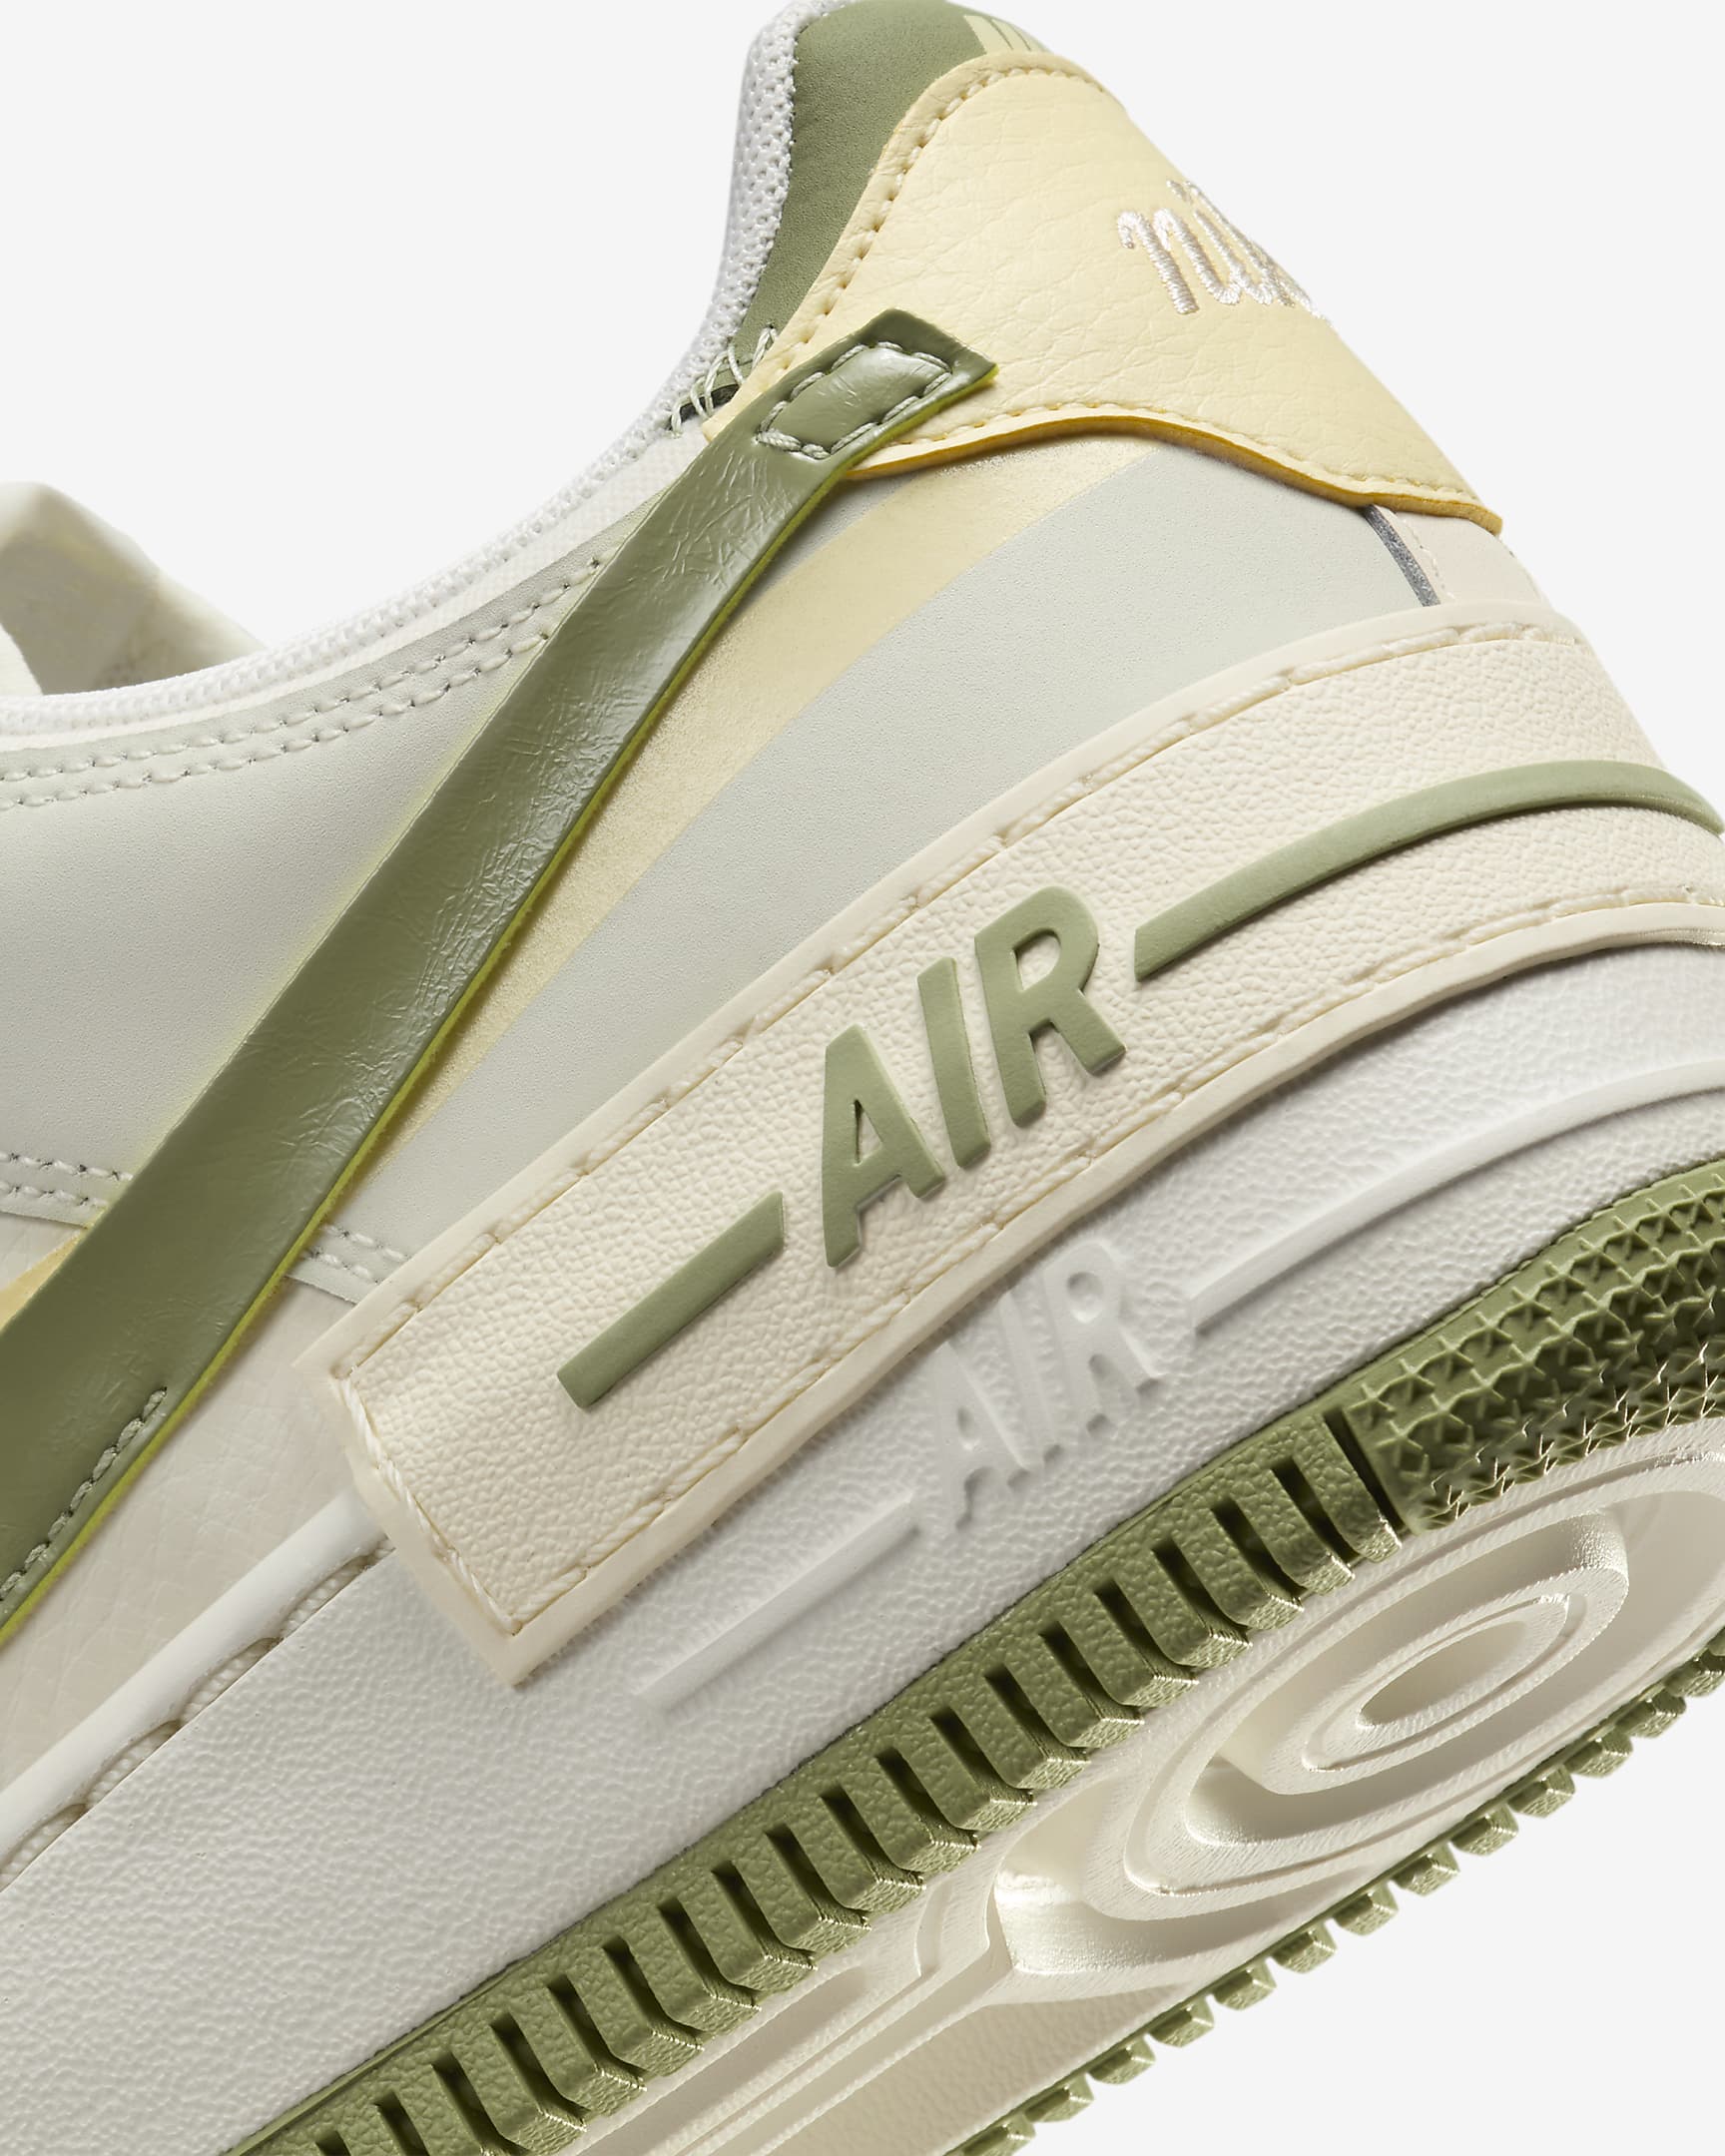 Nike Air Force 1 Shadow Women's Shoes - Sail/Alabaster/Pale Ivory/Oil Green